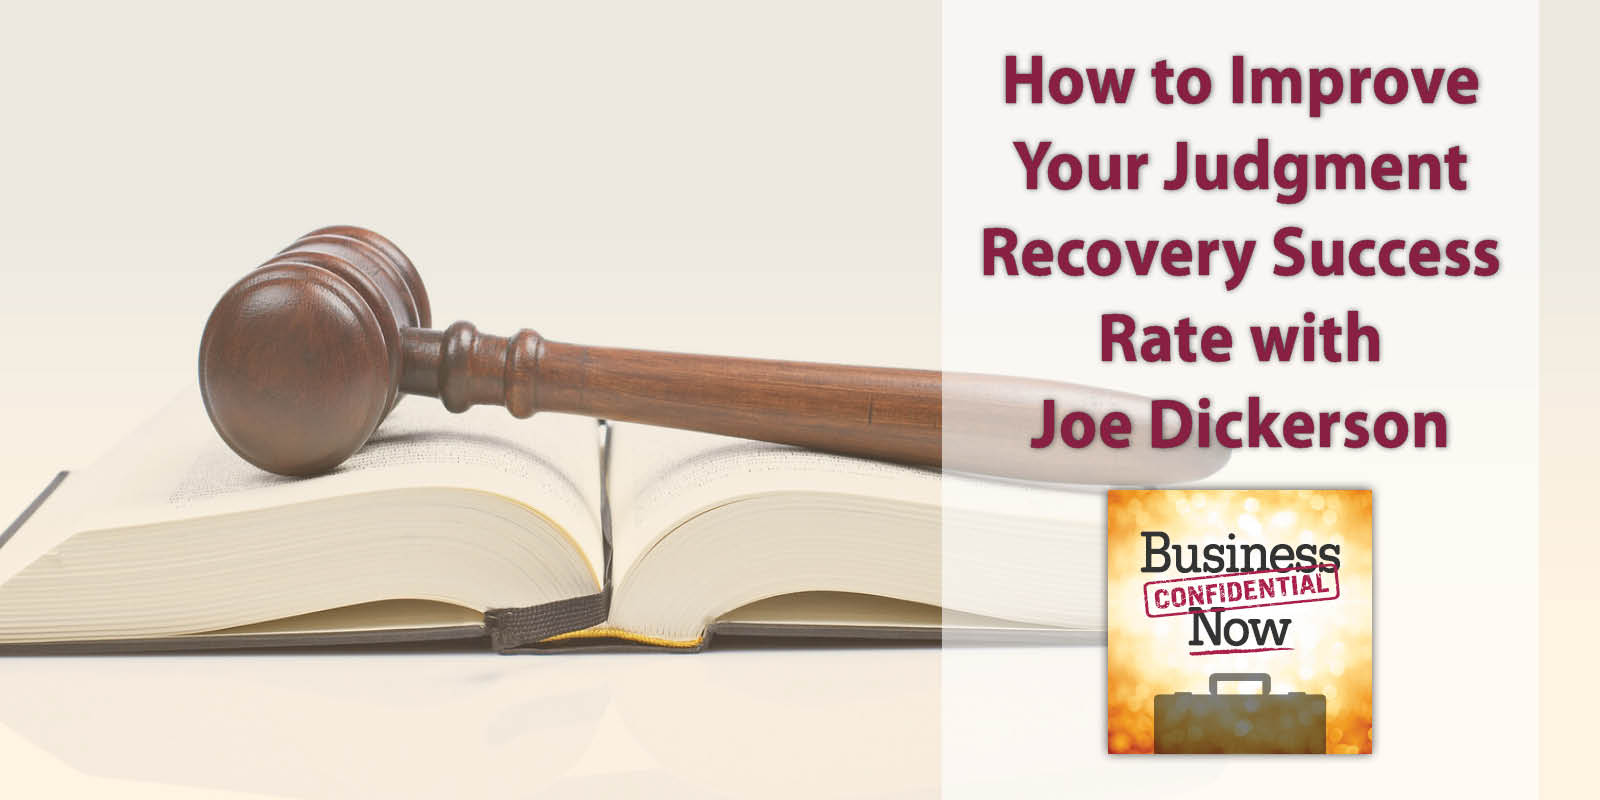 judgment recovery